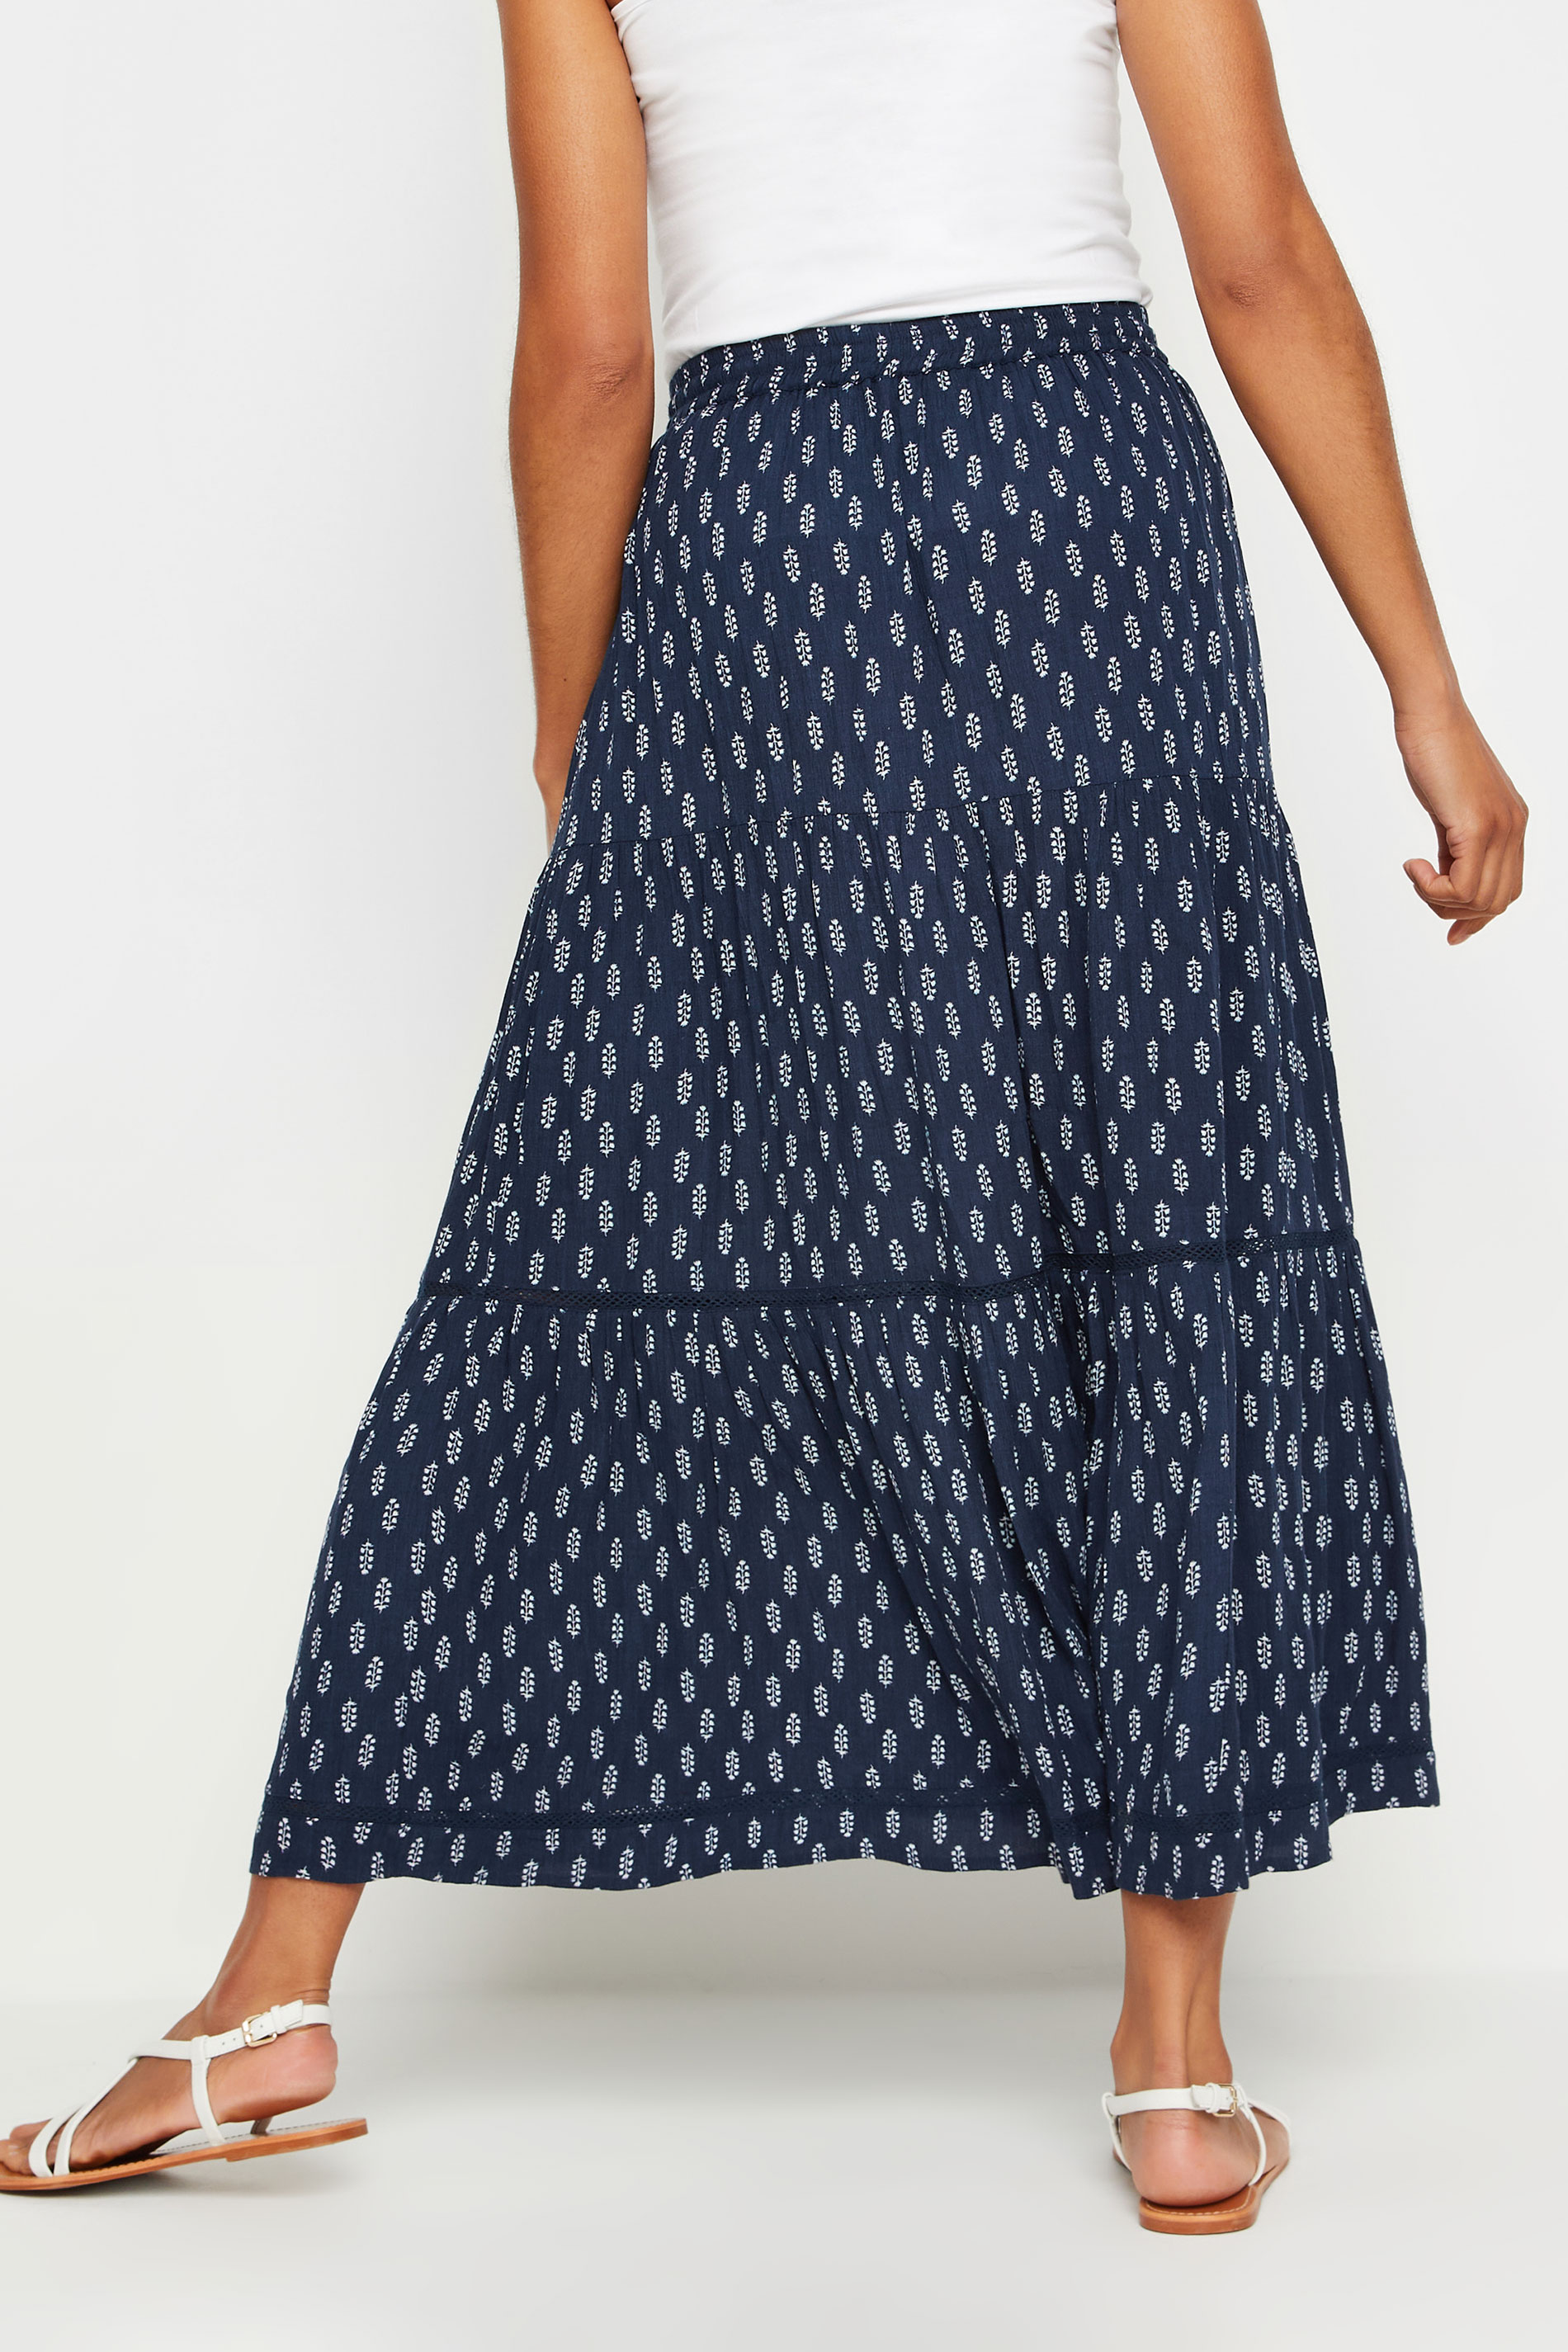 M&Co Navy Blue Floral Print Tiered Maxi Skirt | M&Co  3